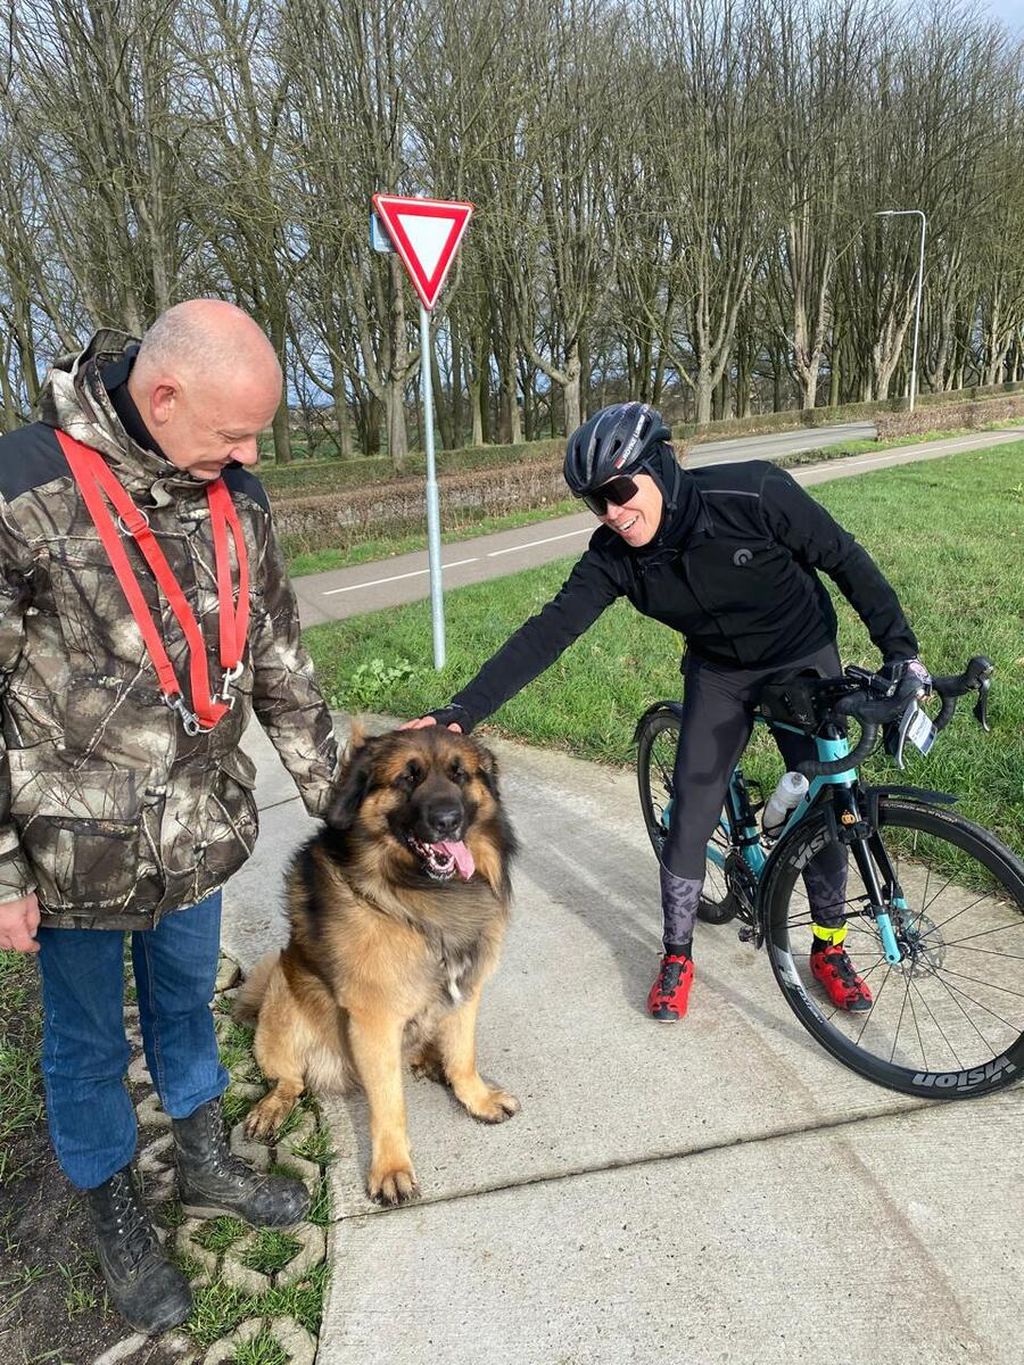 Royke met with a resident who was accompanied by their tall and large dog. The resident always brings their dog when they are outside, especially when walking in parks, restaurants, and other locations.